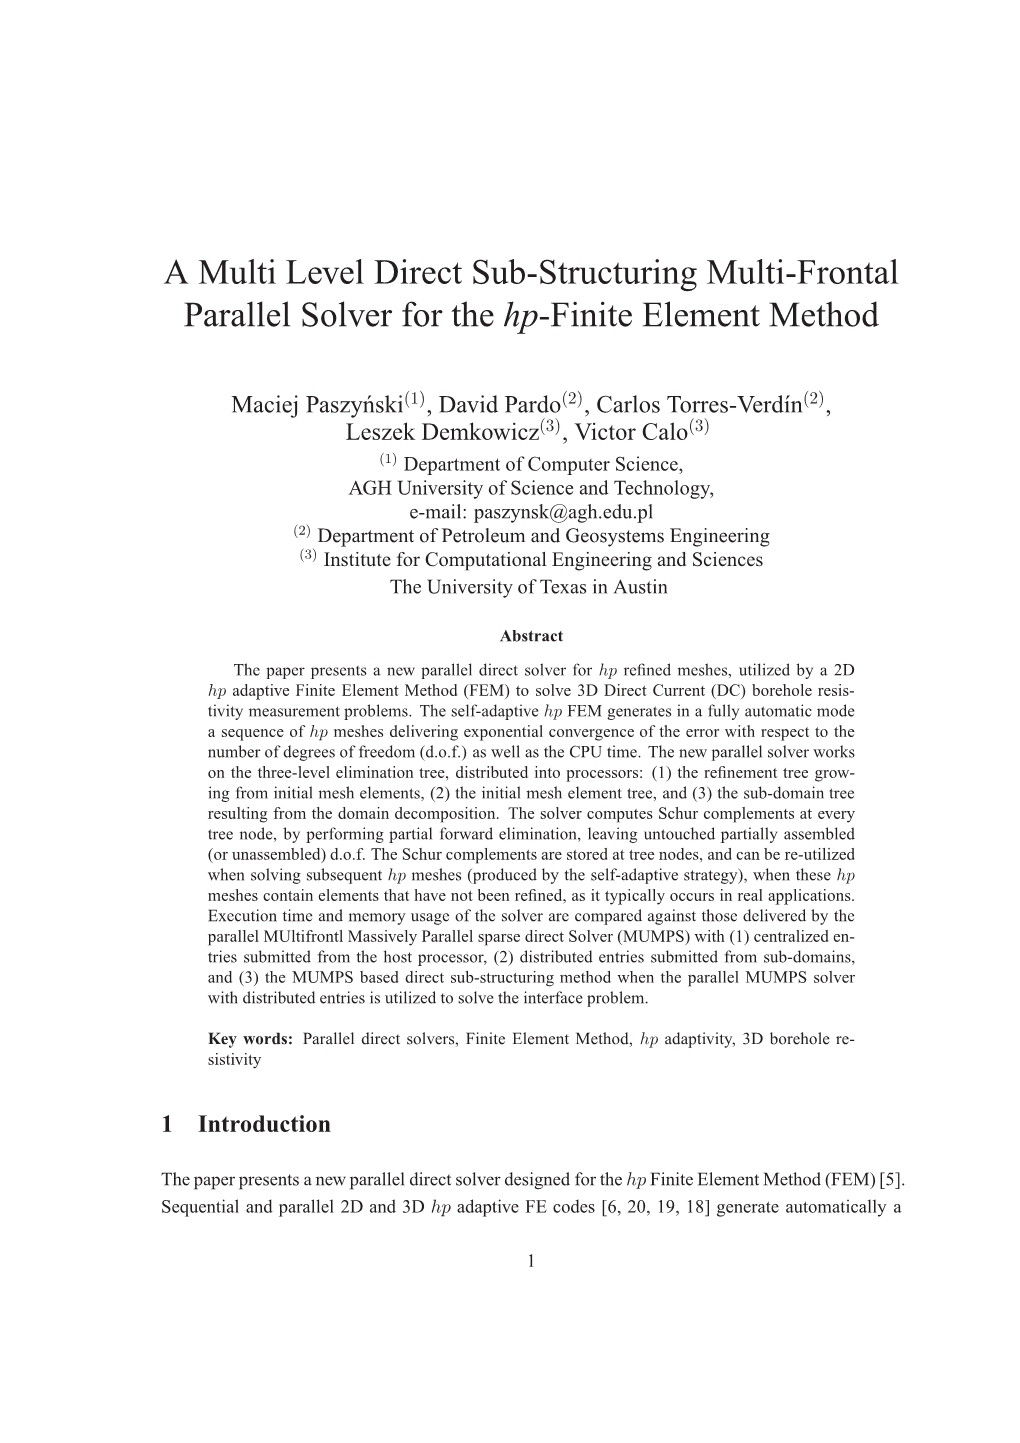 A Multi Level Direct Sub-Structuring Multi-Frontal Parallel Solver for the Hp-Finite Element Method